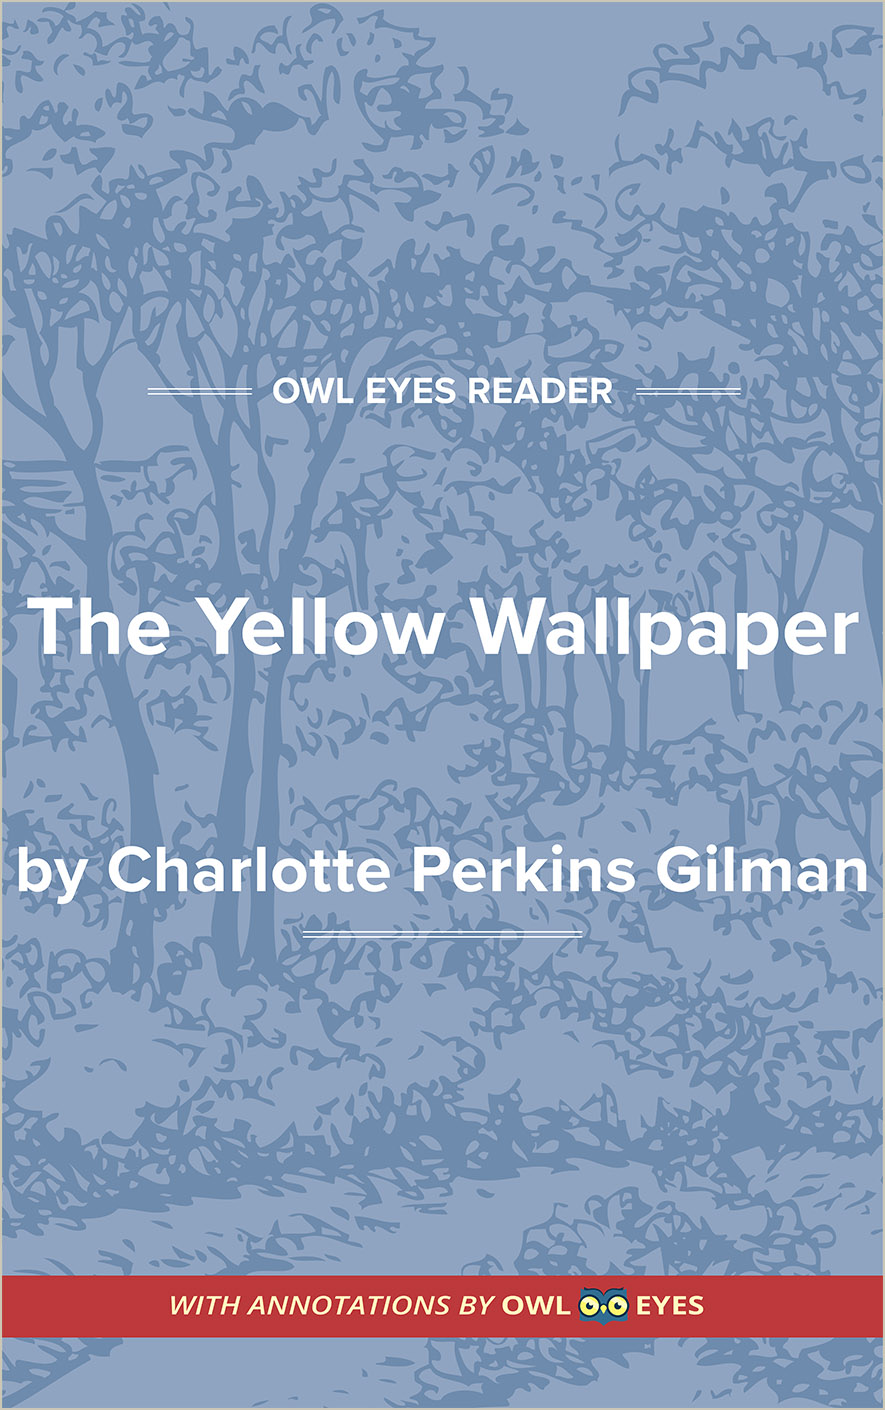 The Yellow Wallpaper by Charlotte Perkins Gilman  Symbols  YouTube